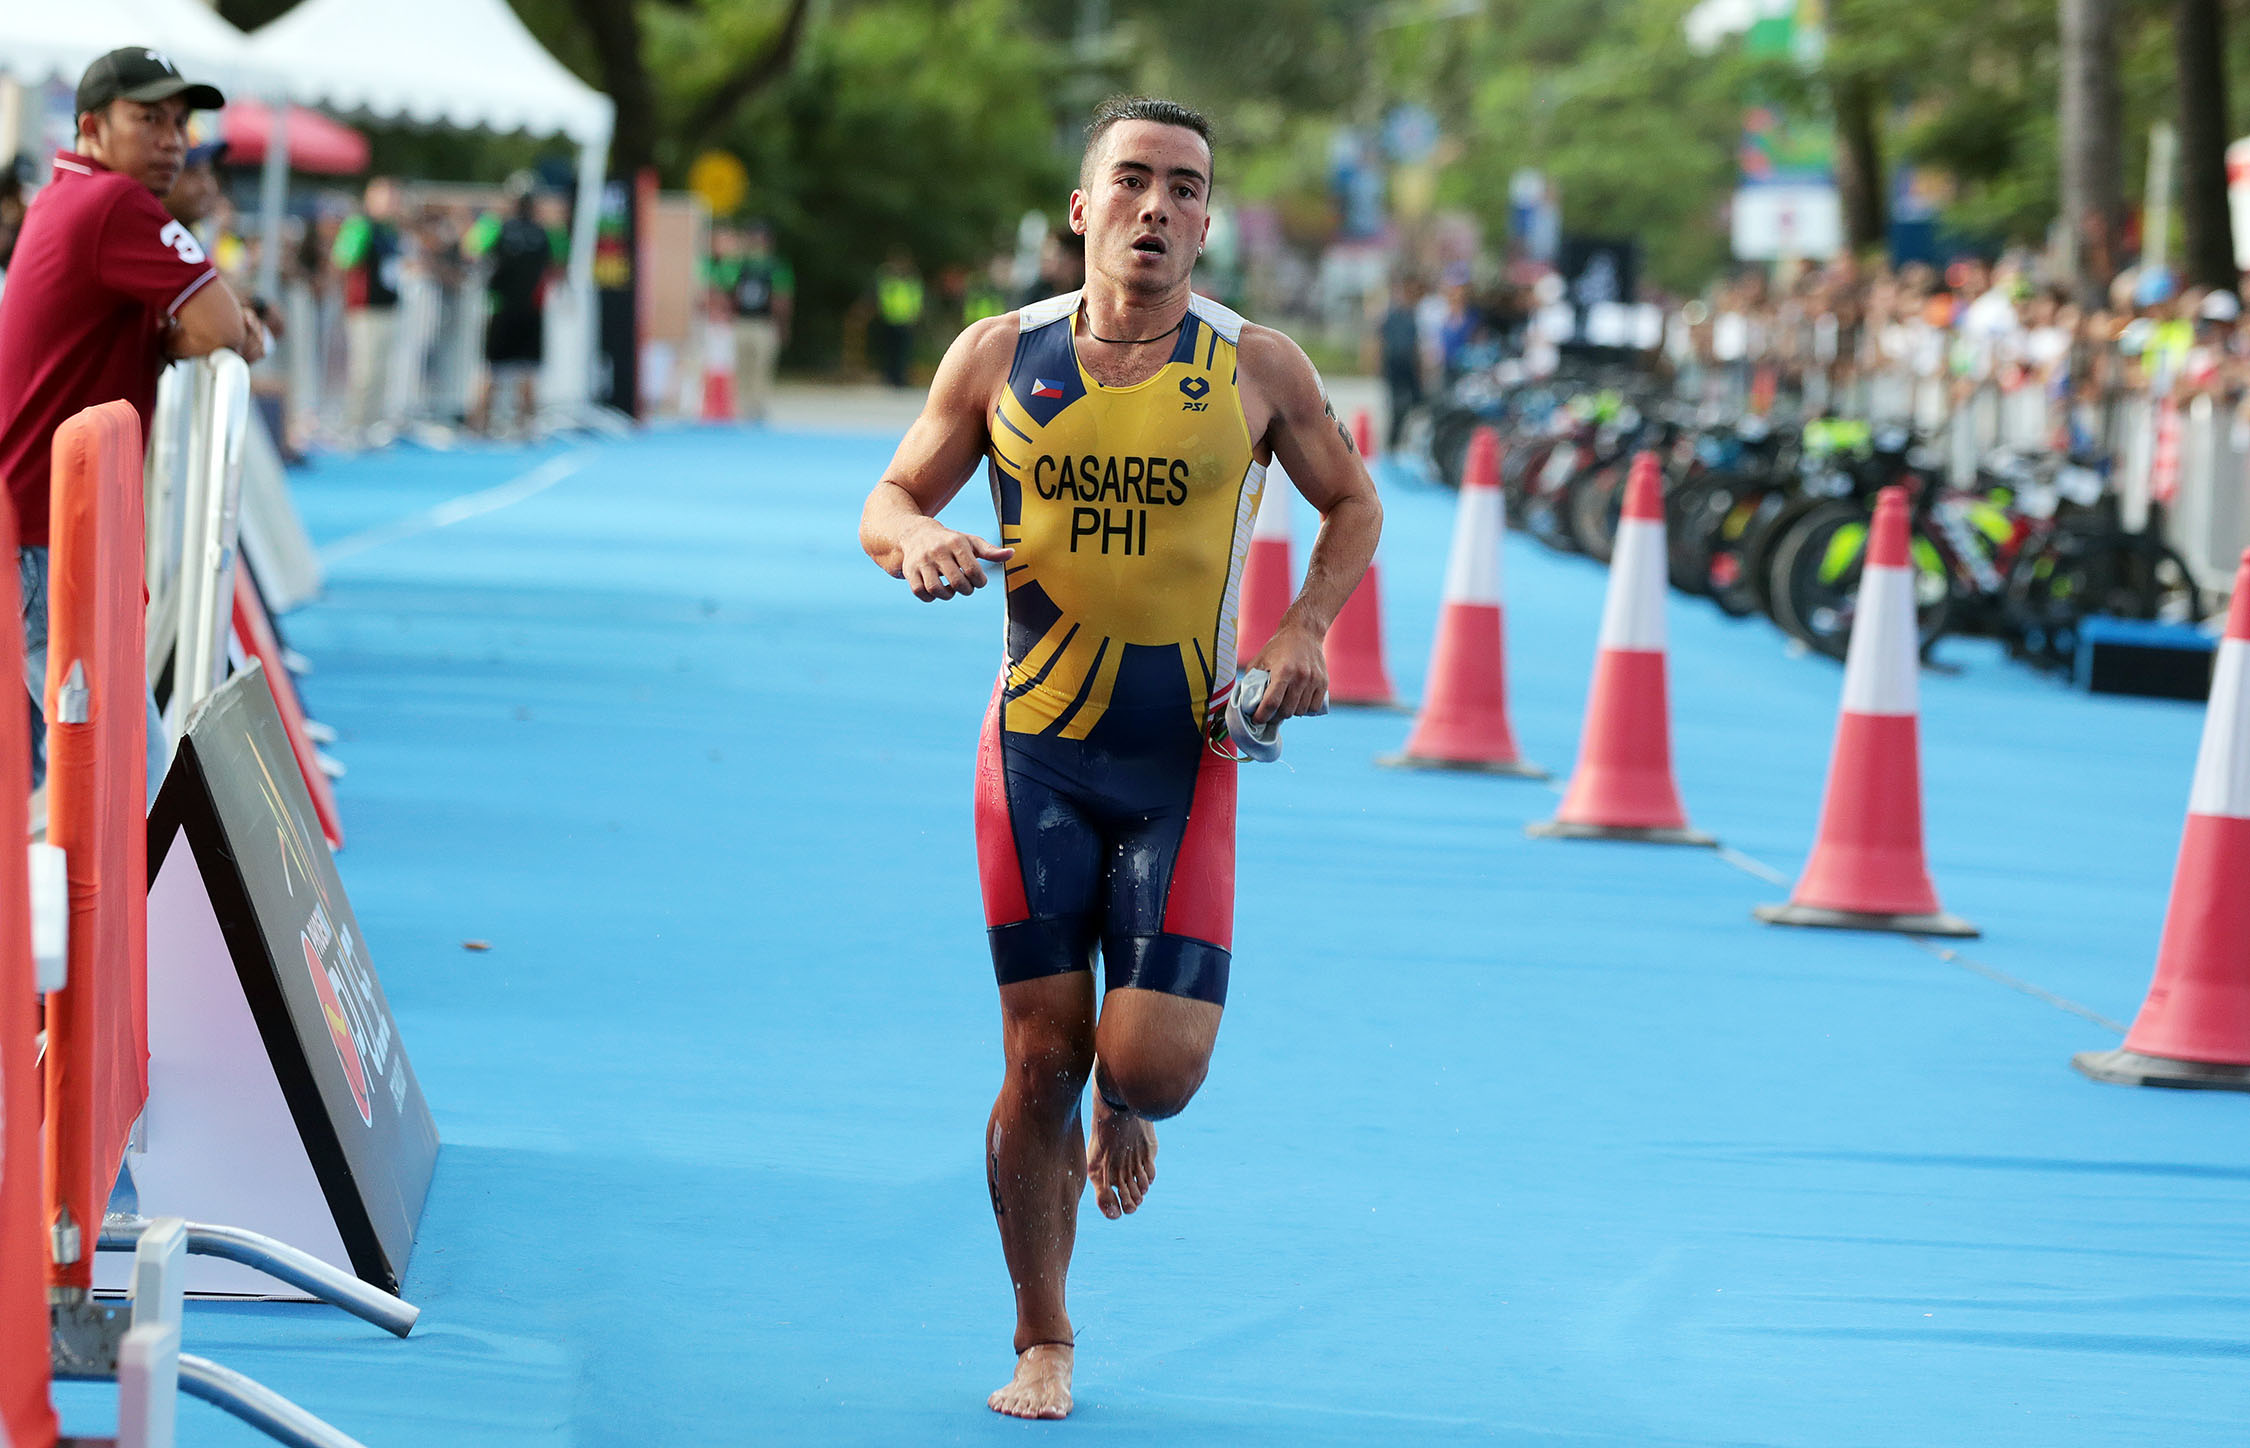 CACERES READY FOR IRONMAN DISTANCE